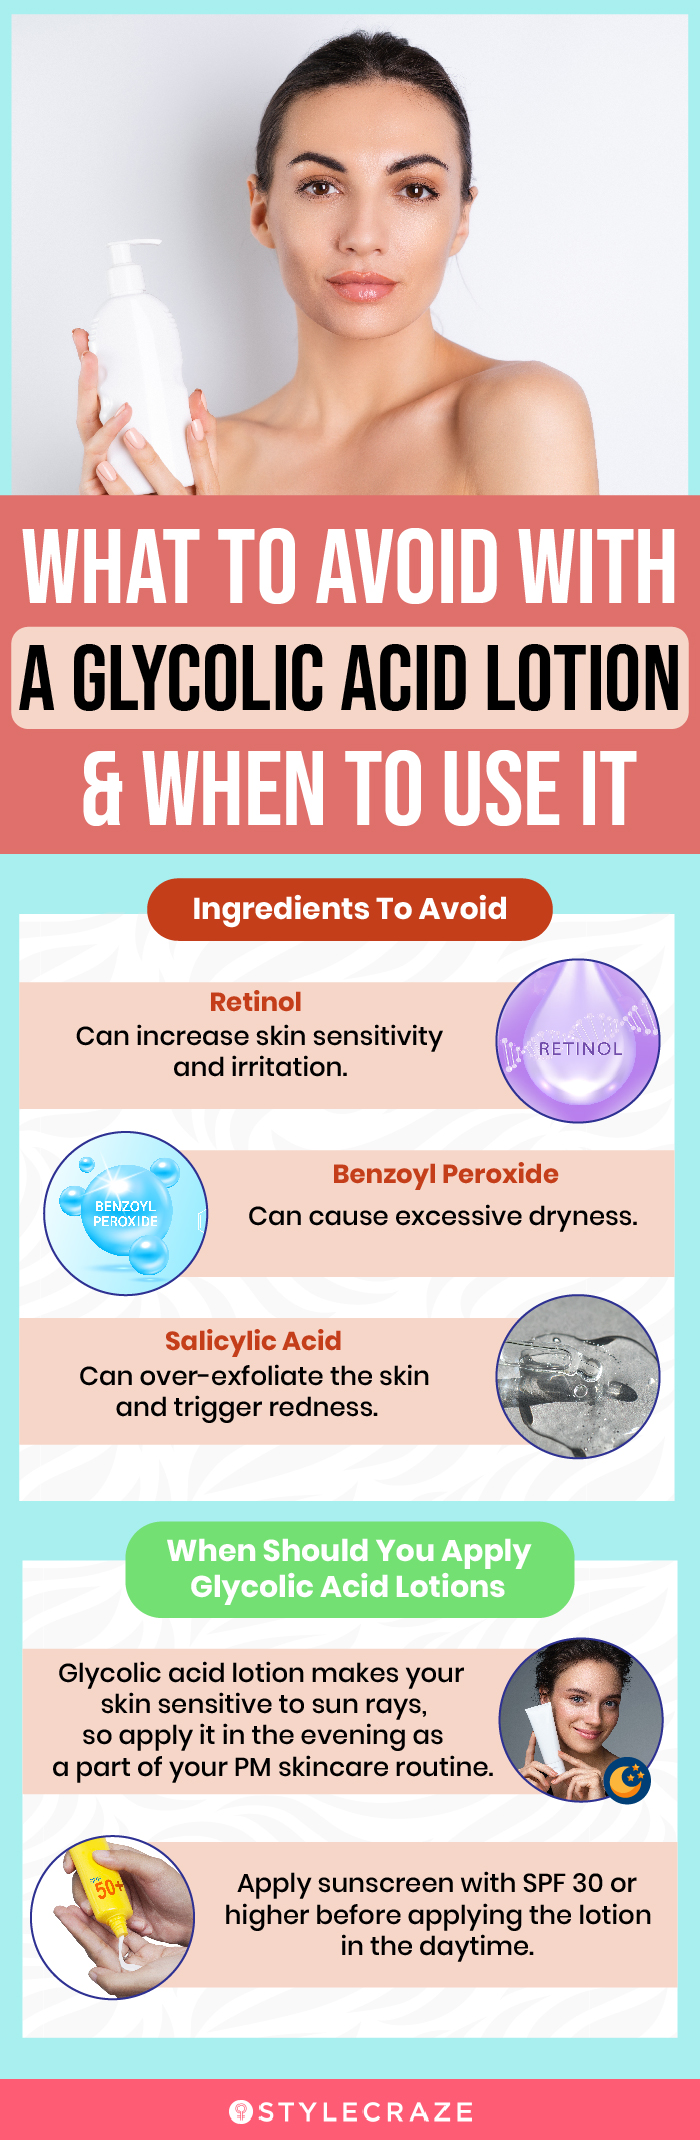 What To Avoid With A Glycolic Acid Lotion & When To Use It (infographic)